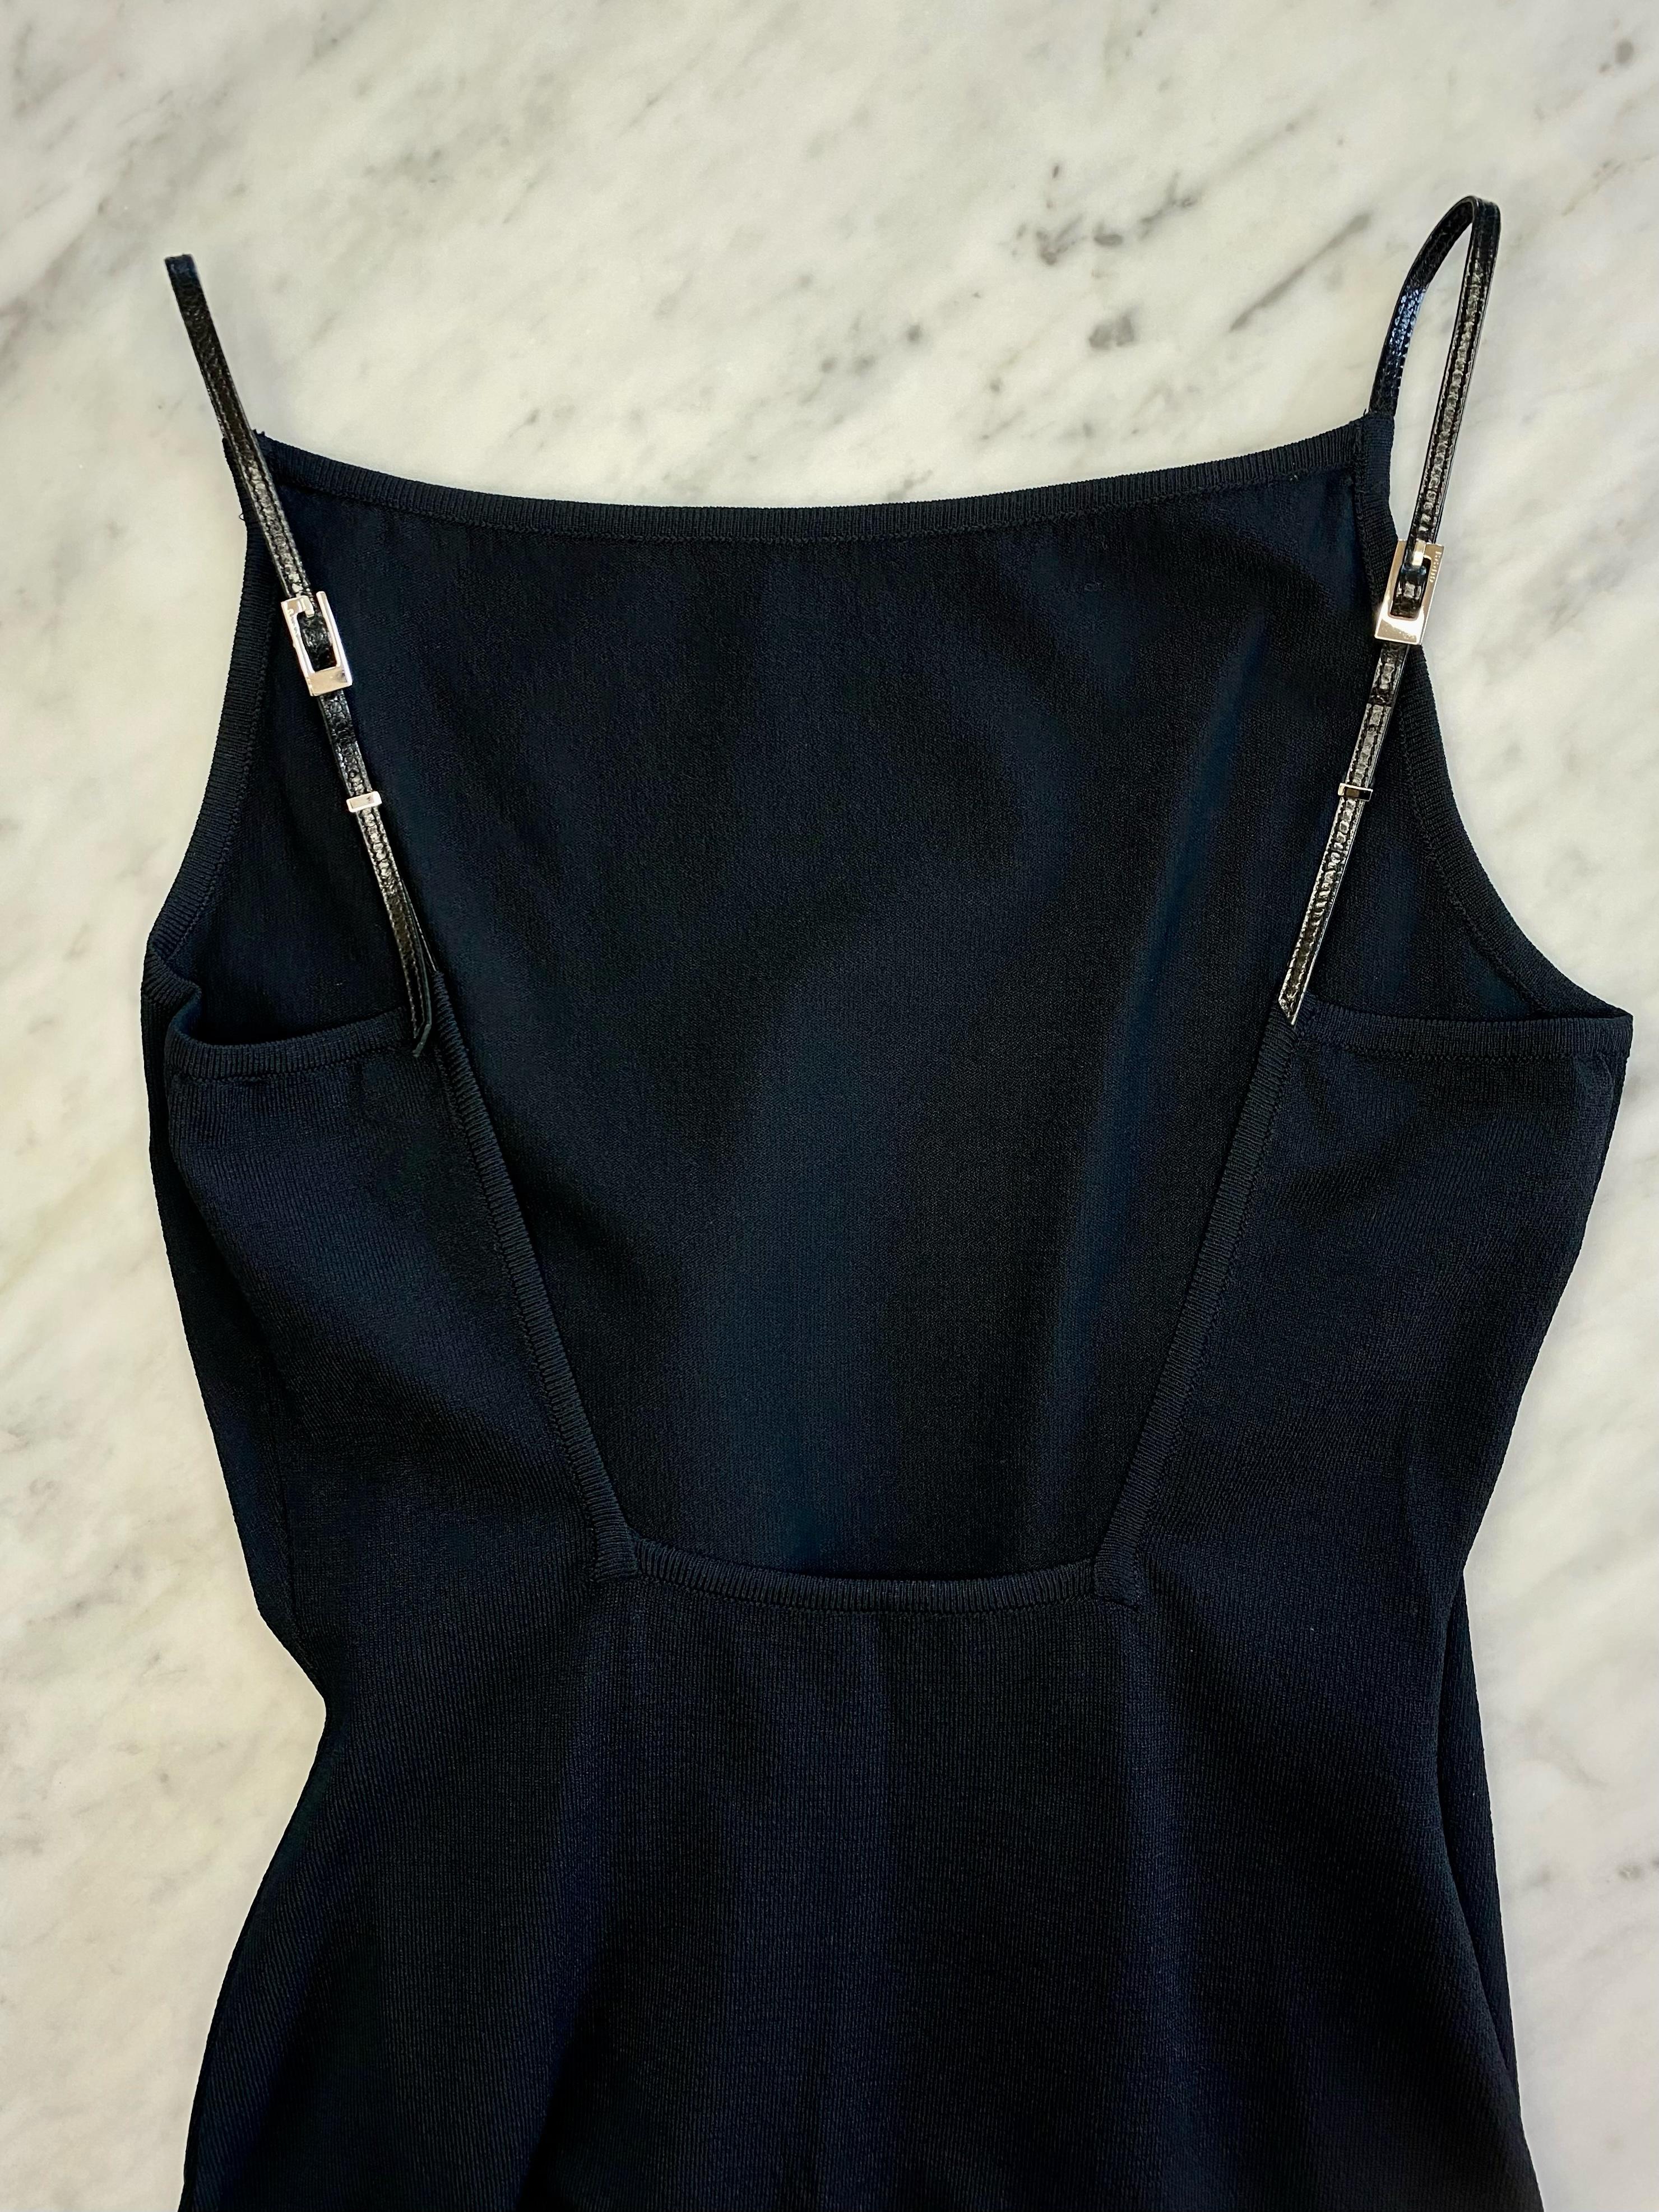 S/S 1998 Gucci by Tom Ford G Buckle Strap Knit Sleeveless Dress (Robe sans manches en maille) en vente 2